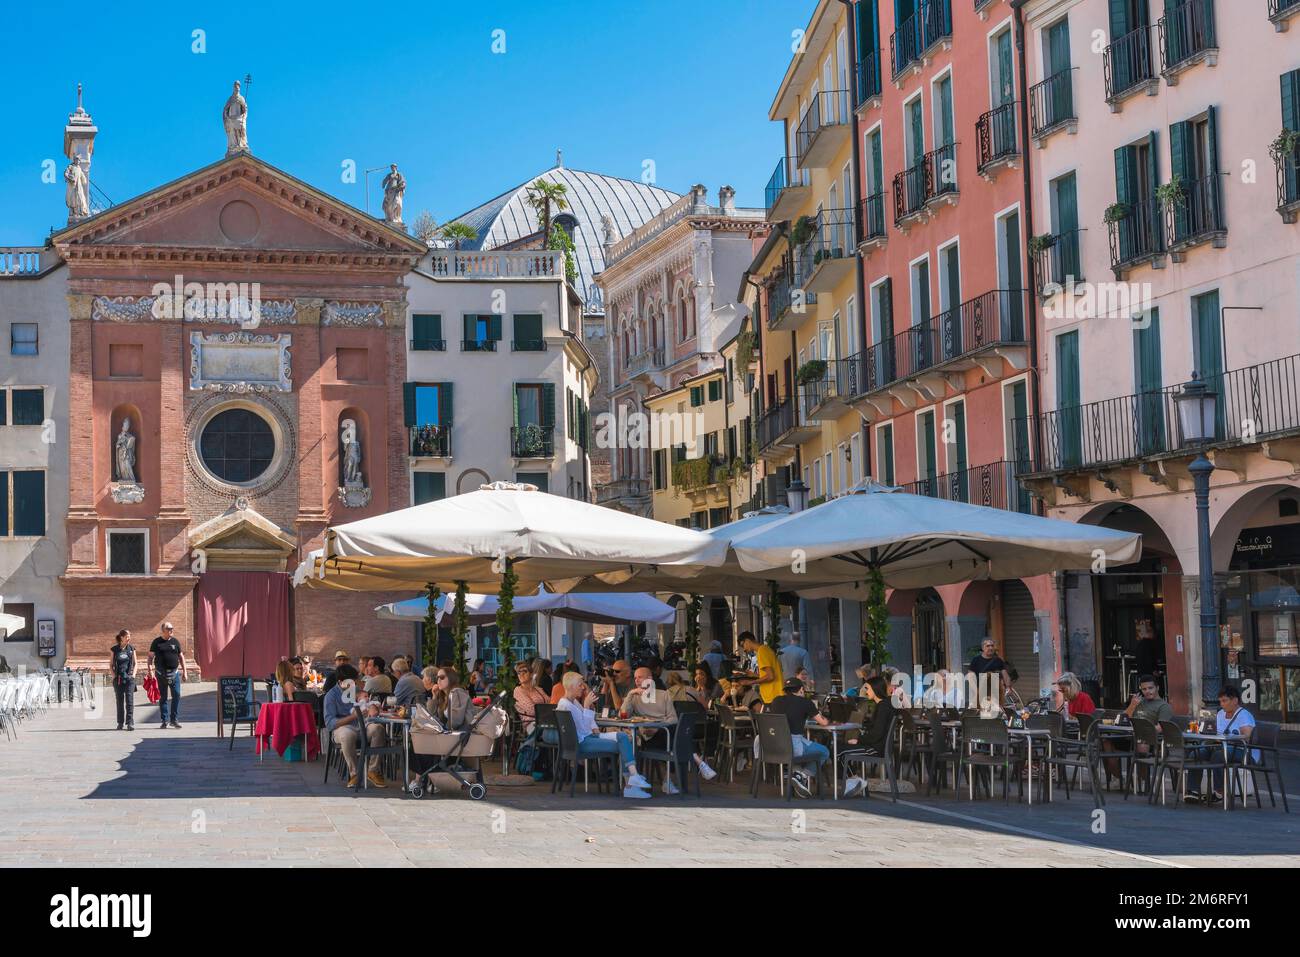 Cafe piazza Italy, view in summer of people dining at cafe tables in the Piazza dei Signori in the scenic and historical center of Padua, Veneto,Italy Stock Photo